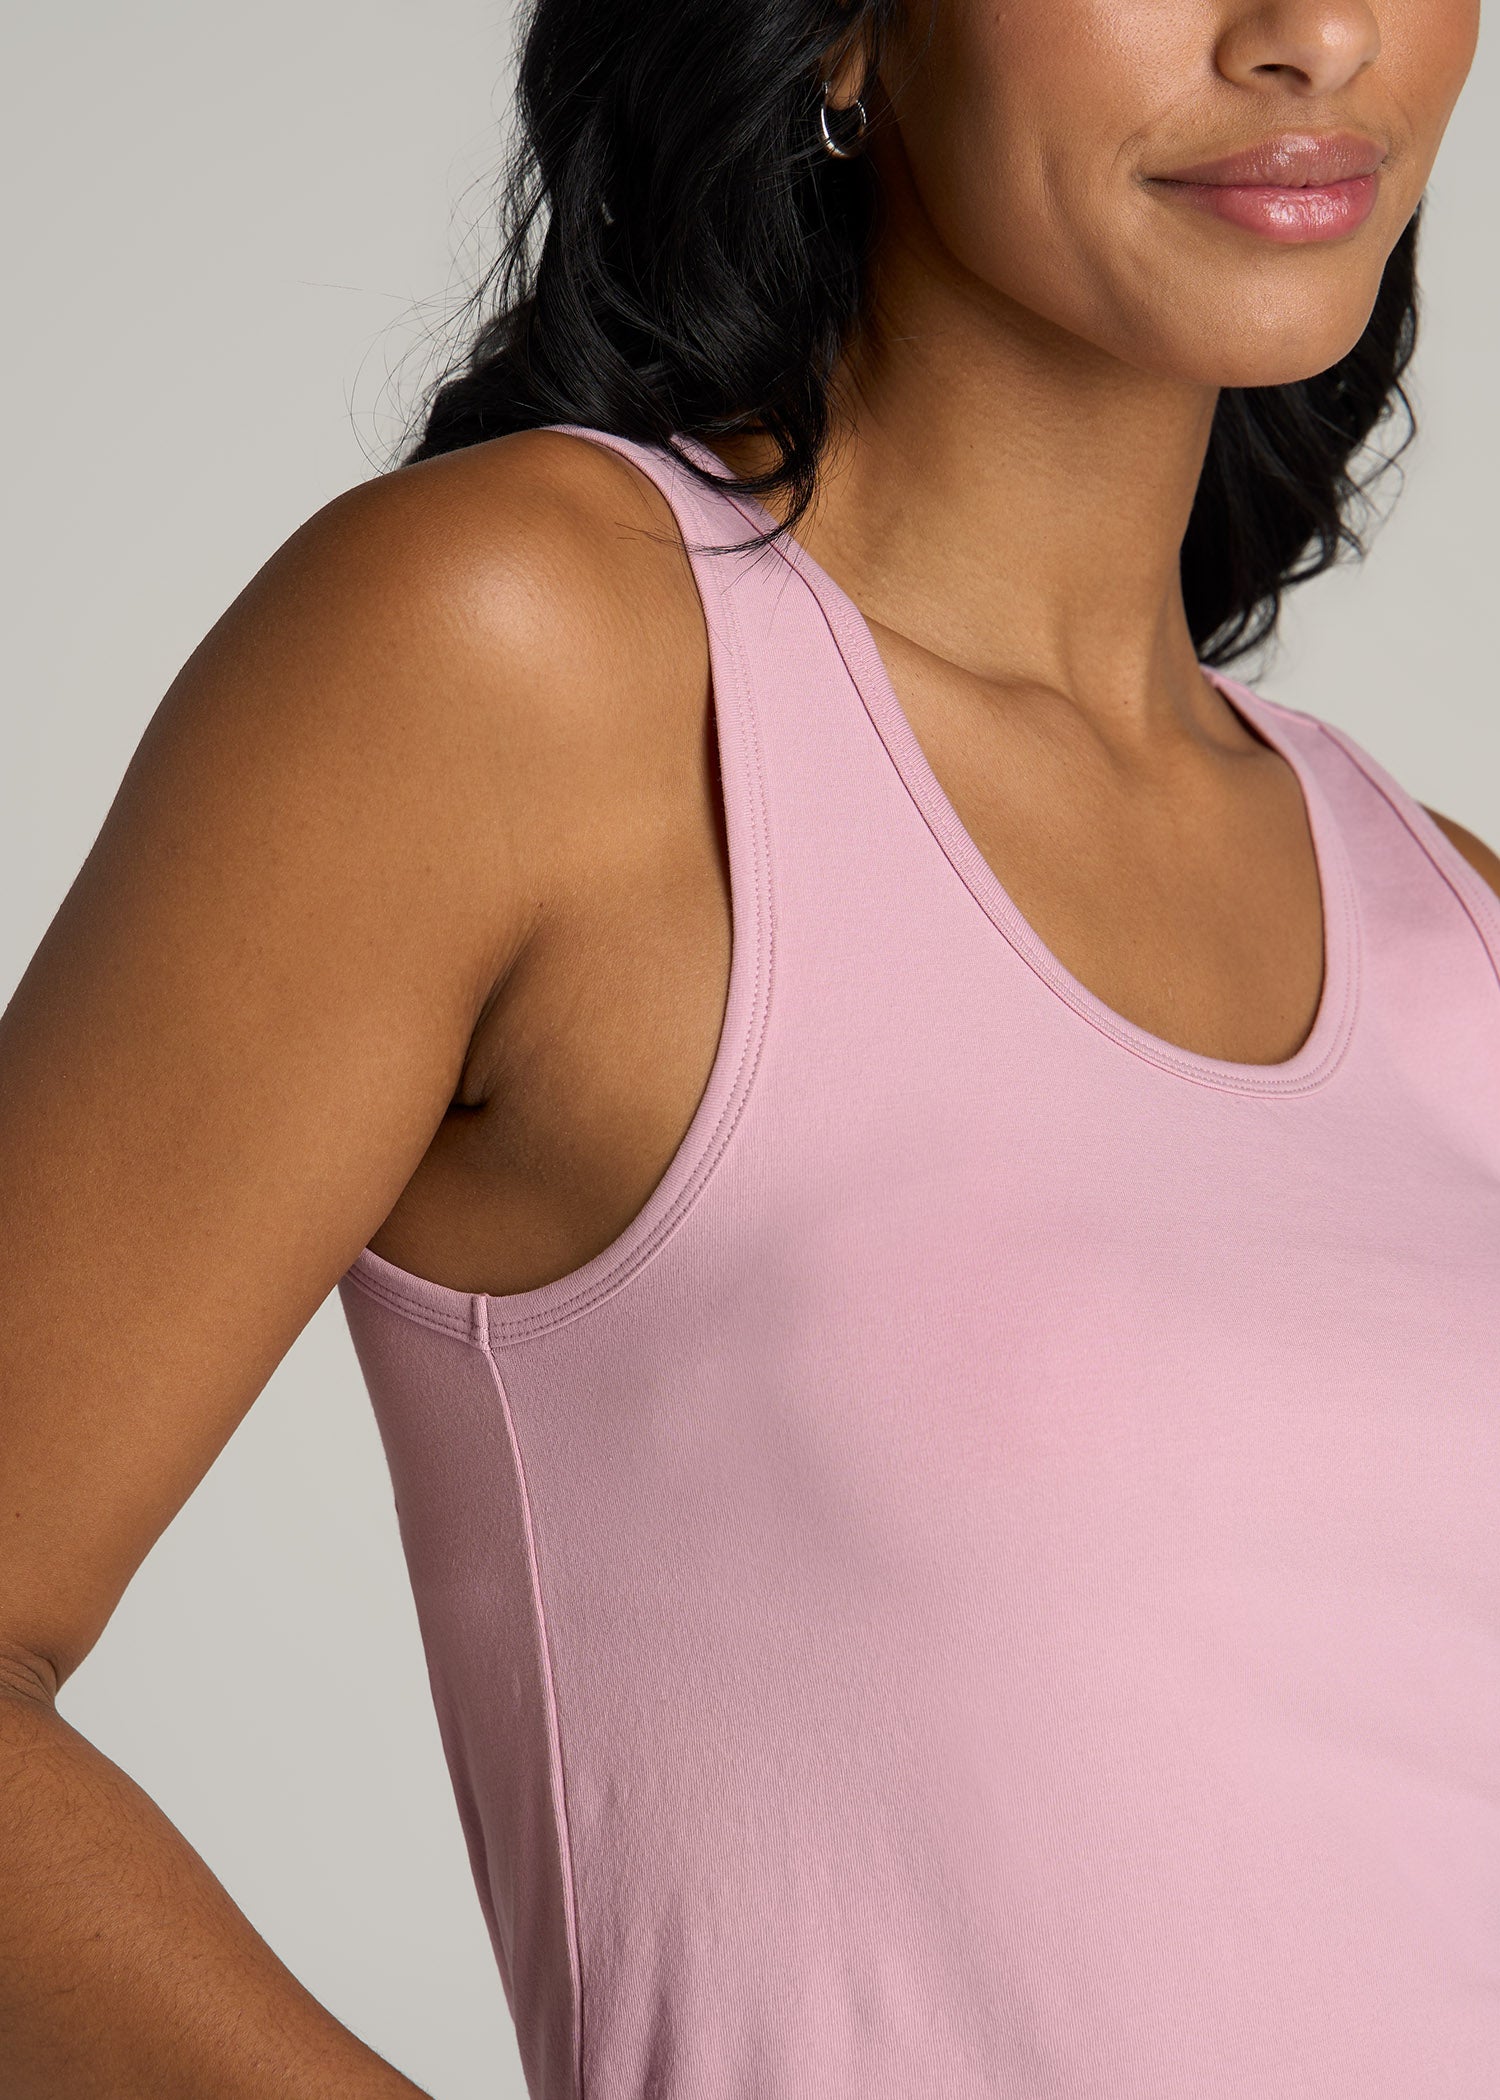 Slim Fit Jersey Tank Top for Tall Women